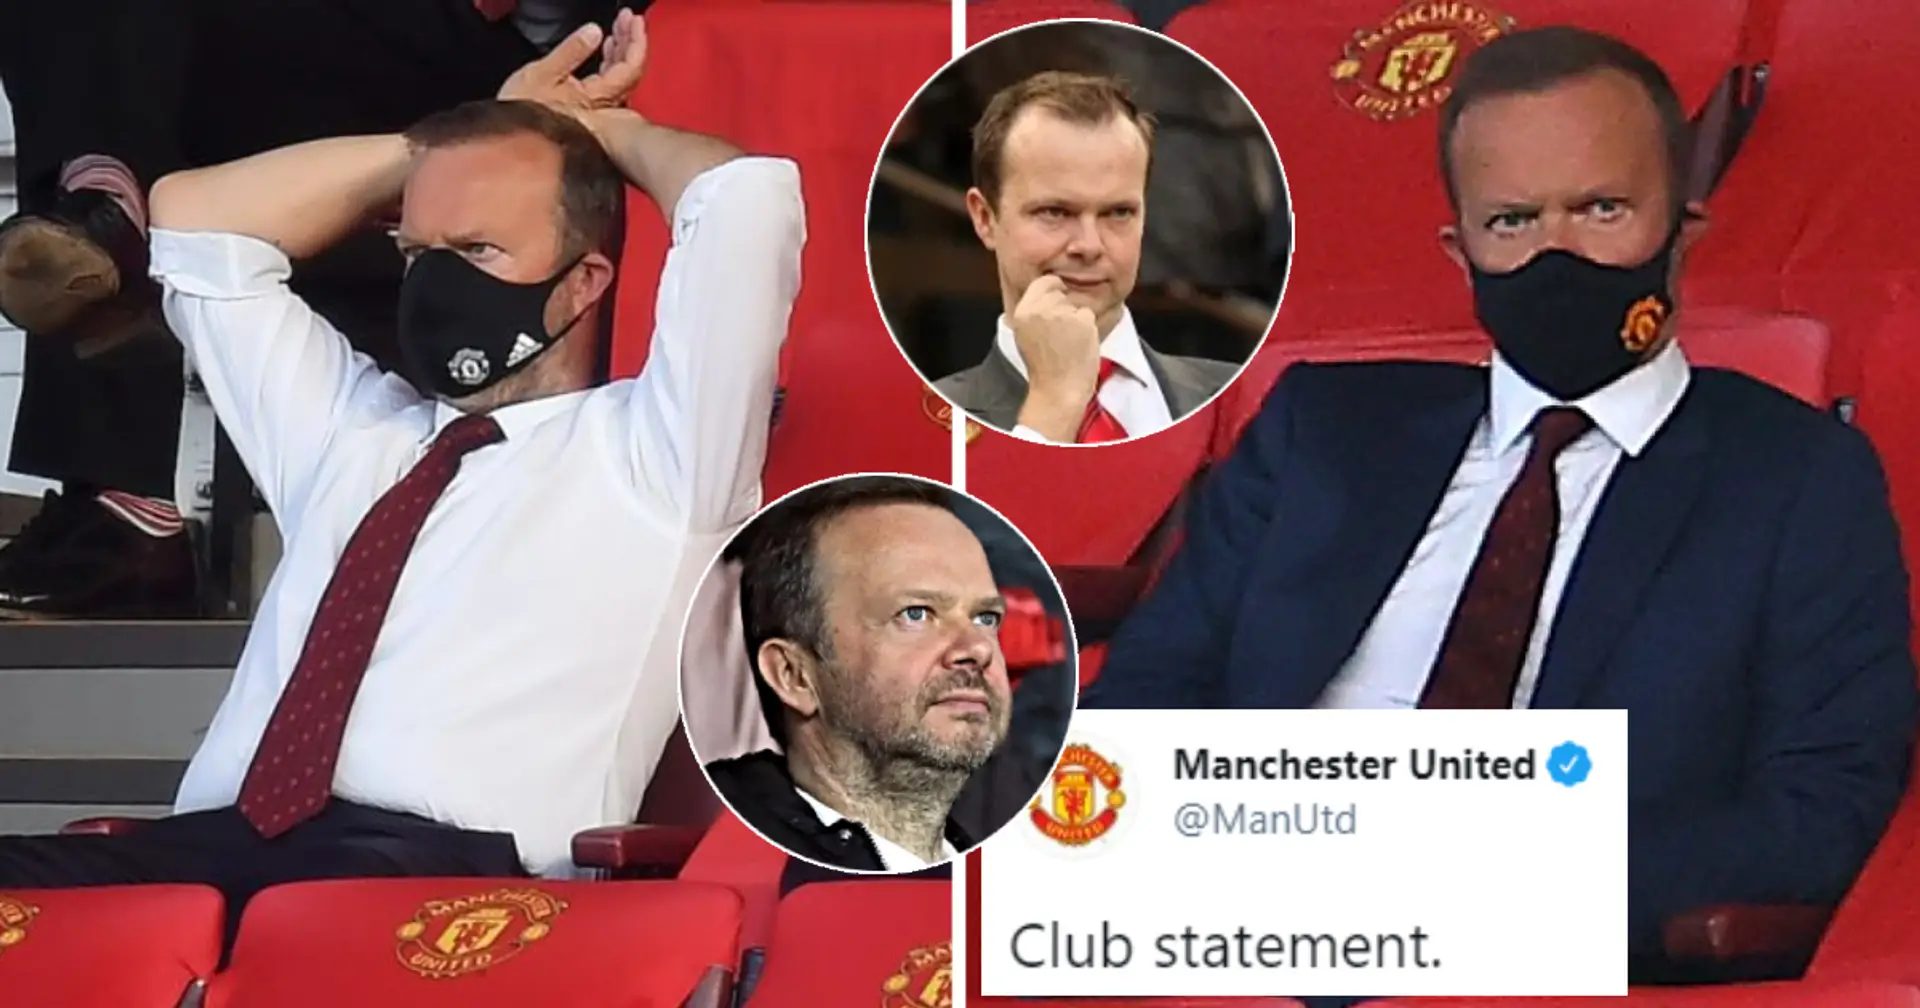 Ed Woodward speaks on Man United exit: 'I desperately wanted to win Premier League'